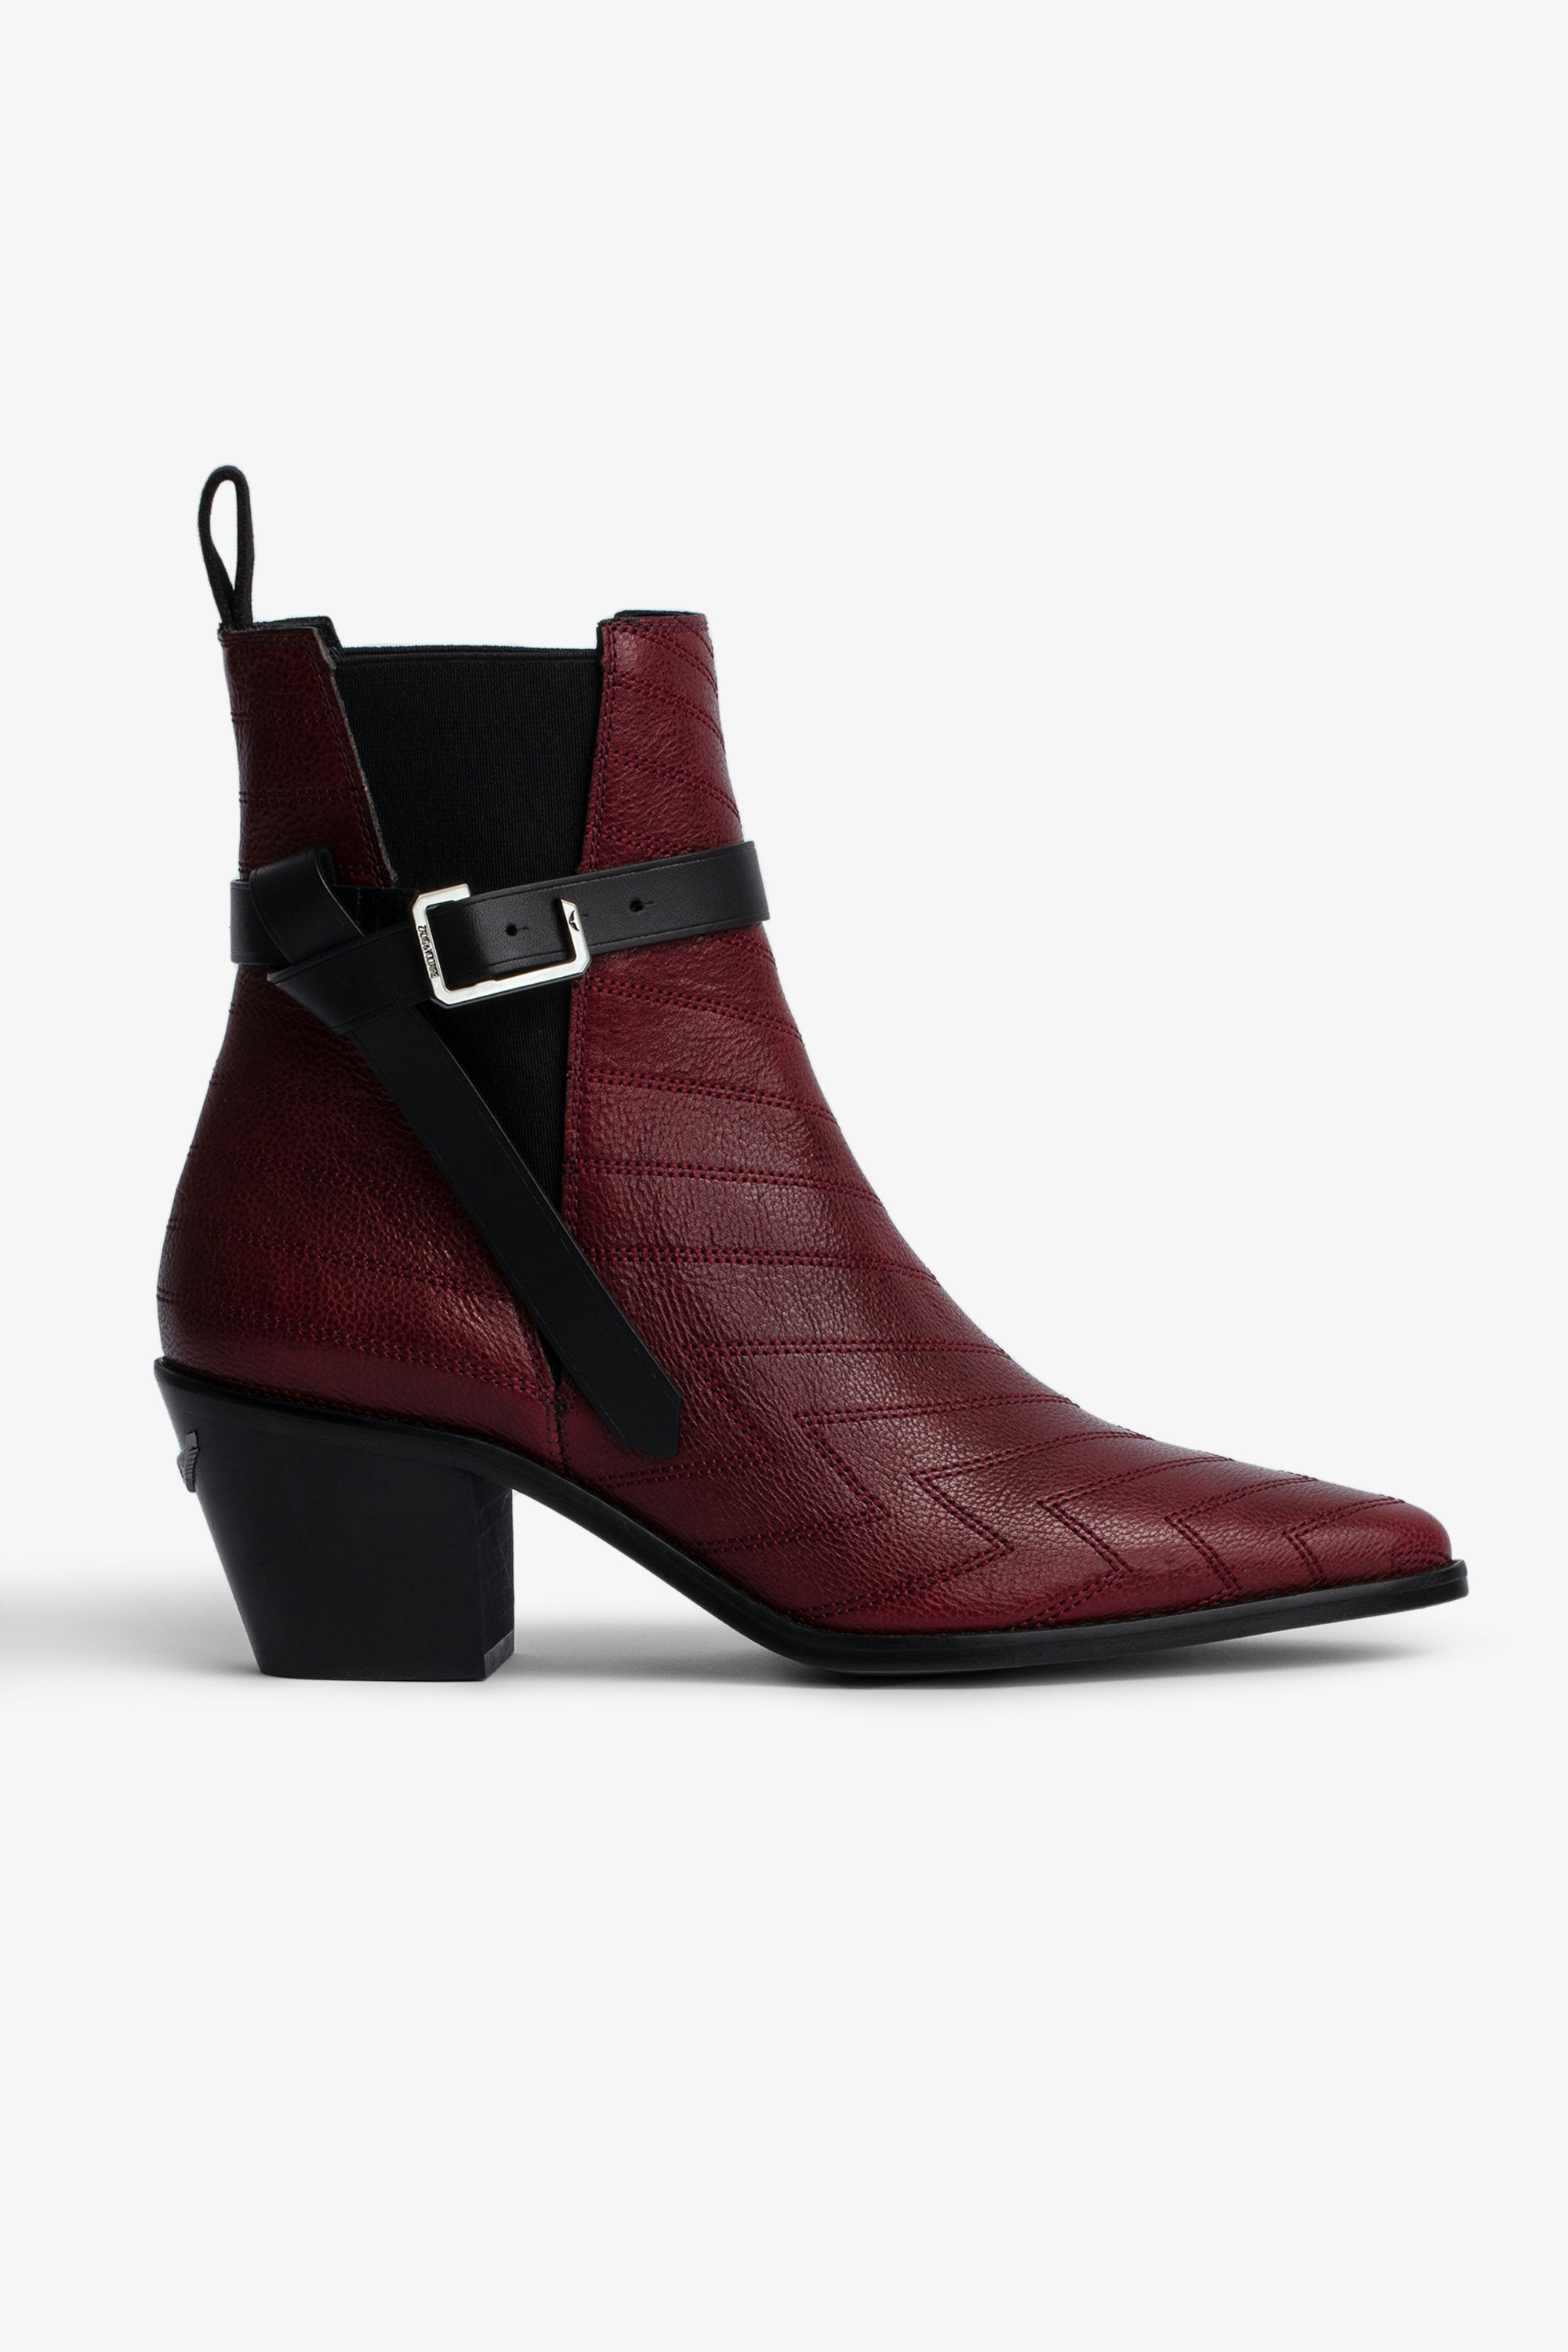 Tyler Ankle Boots Women’s red leather ankle boots with topstitching and adjustable strap